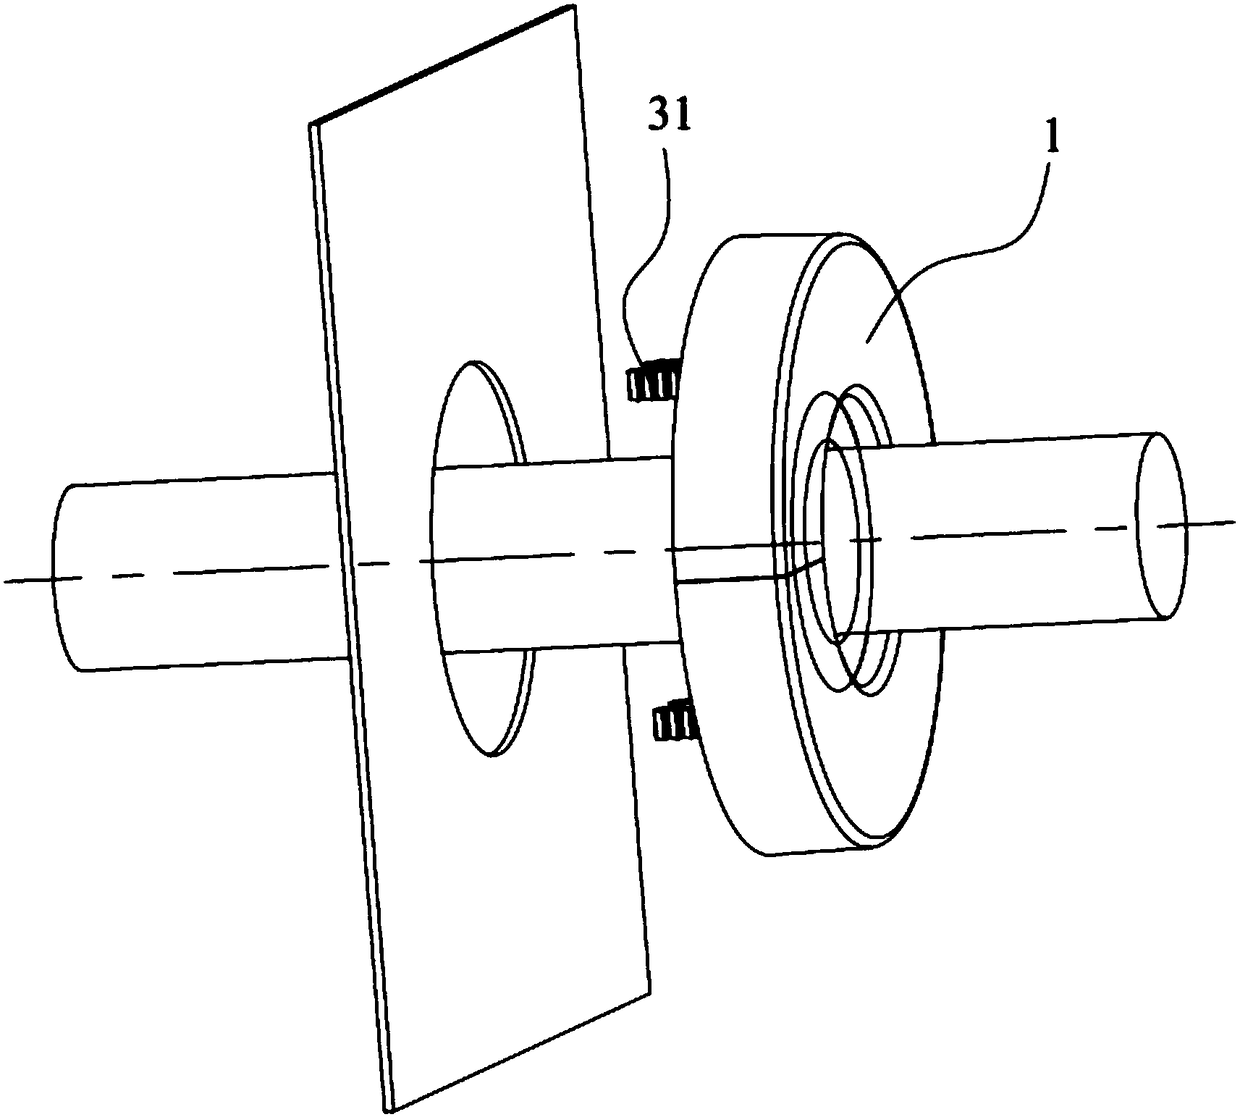 A hole sealing device for metering distribution box